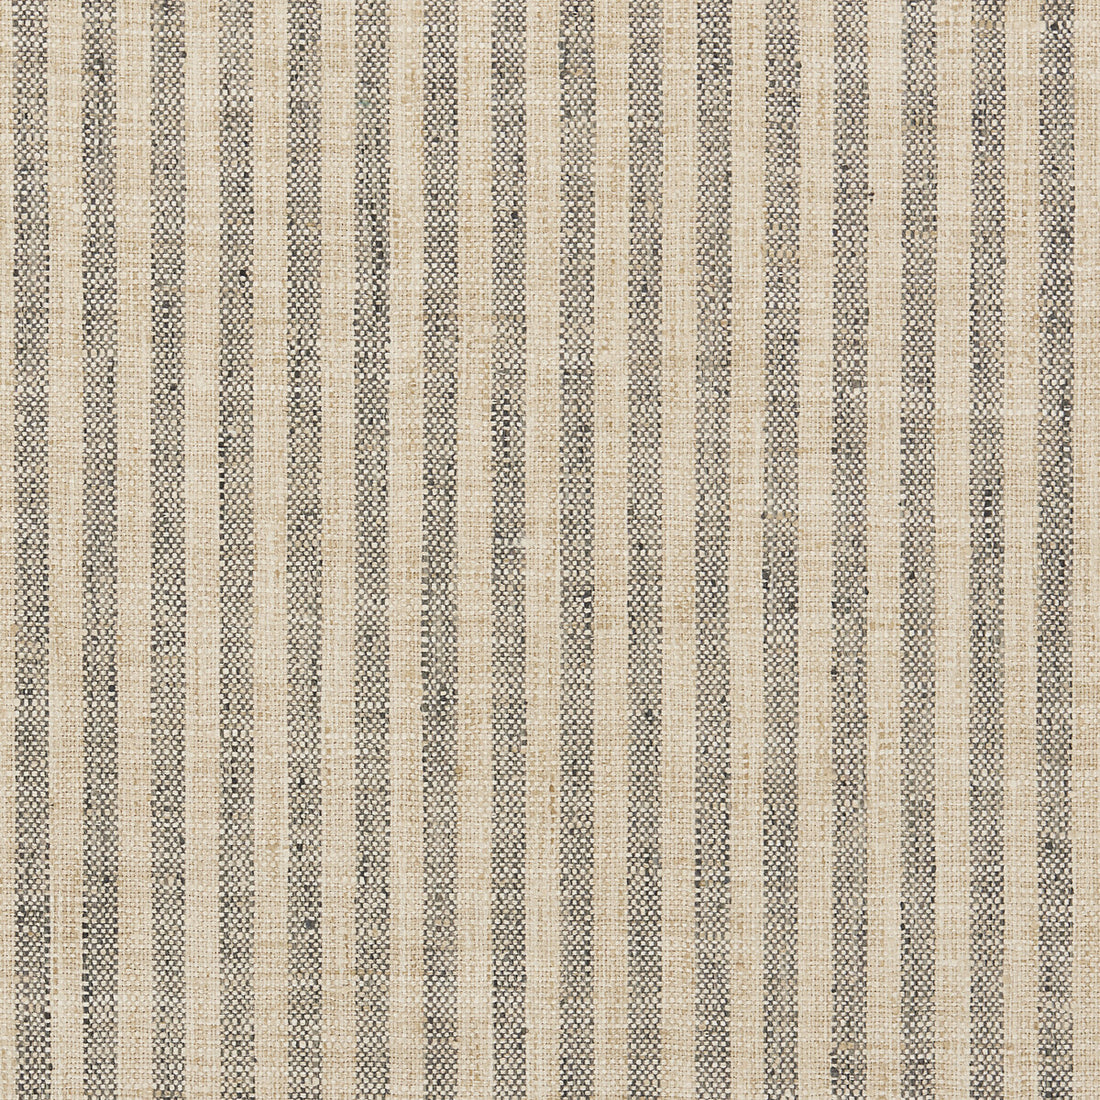 Kravet Basics fabric in 34080-1621 color - pattern 34080.1621.0 - by Kravet Basics in the Bungalow Chic II collection